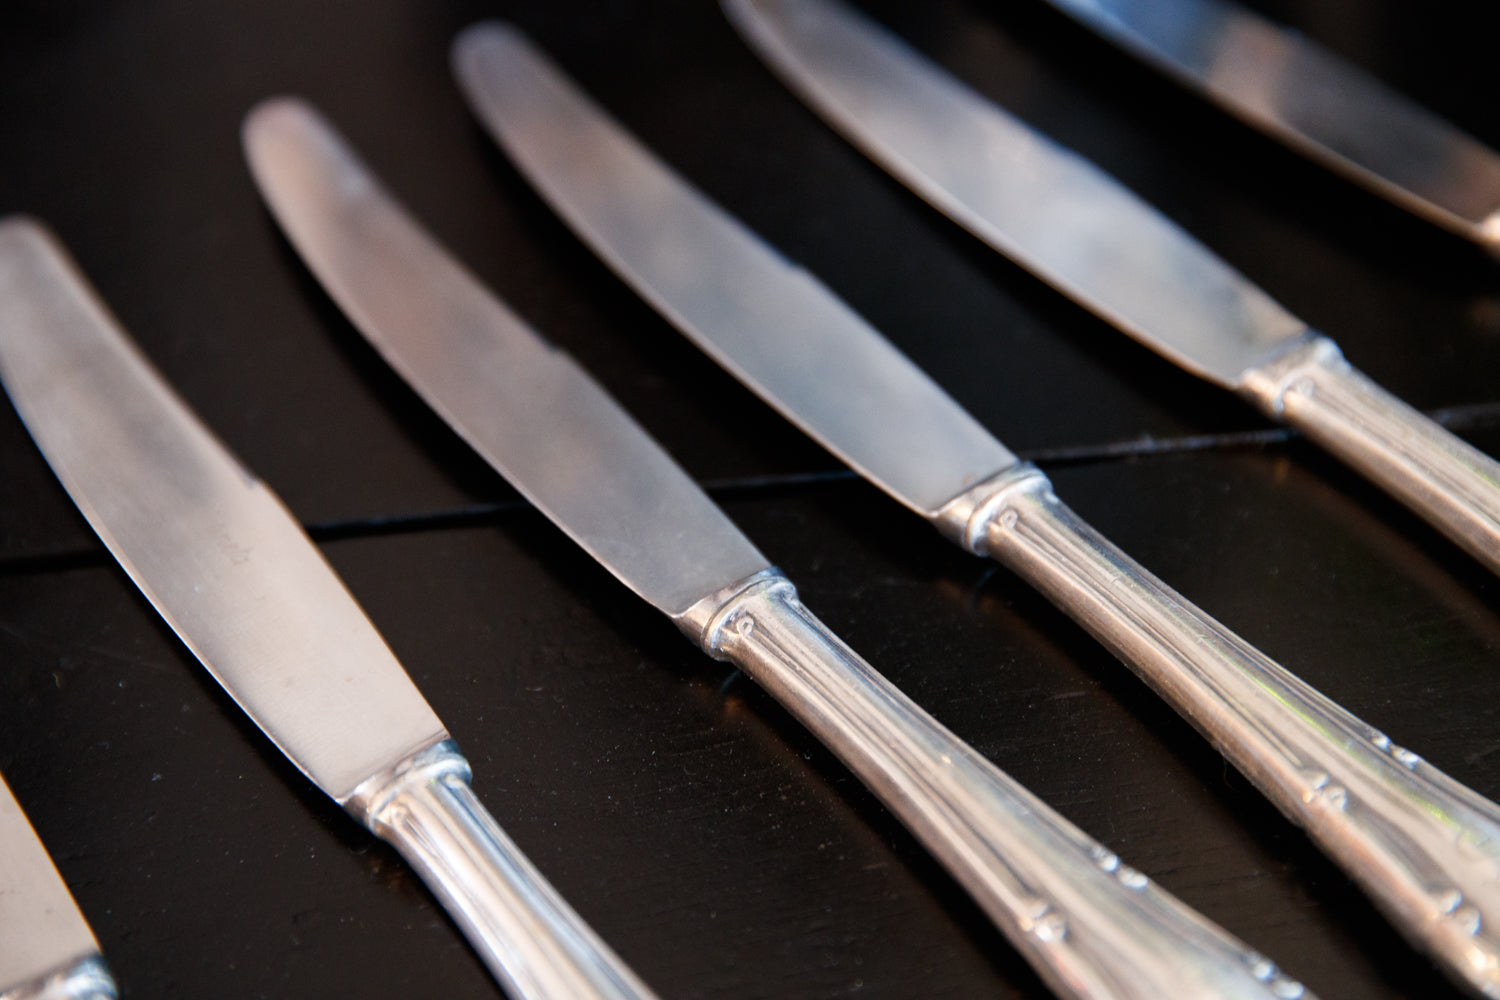 Vintage French Silver Plated Knives